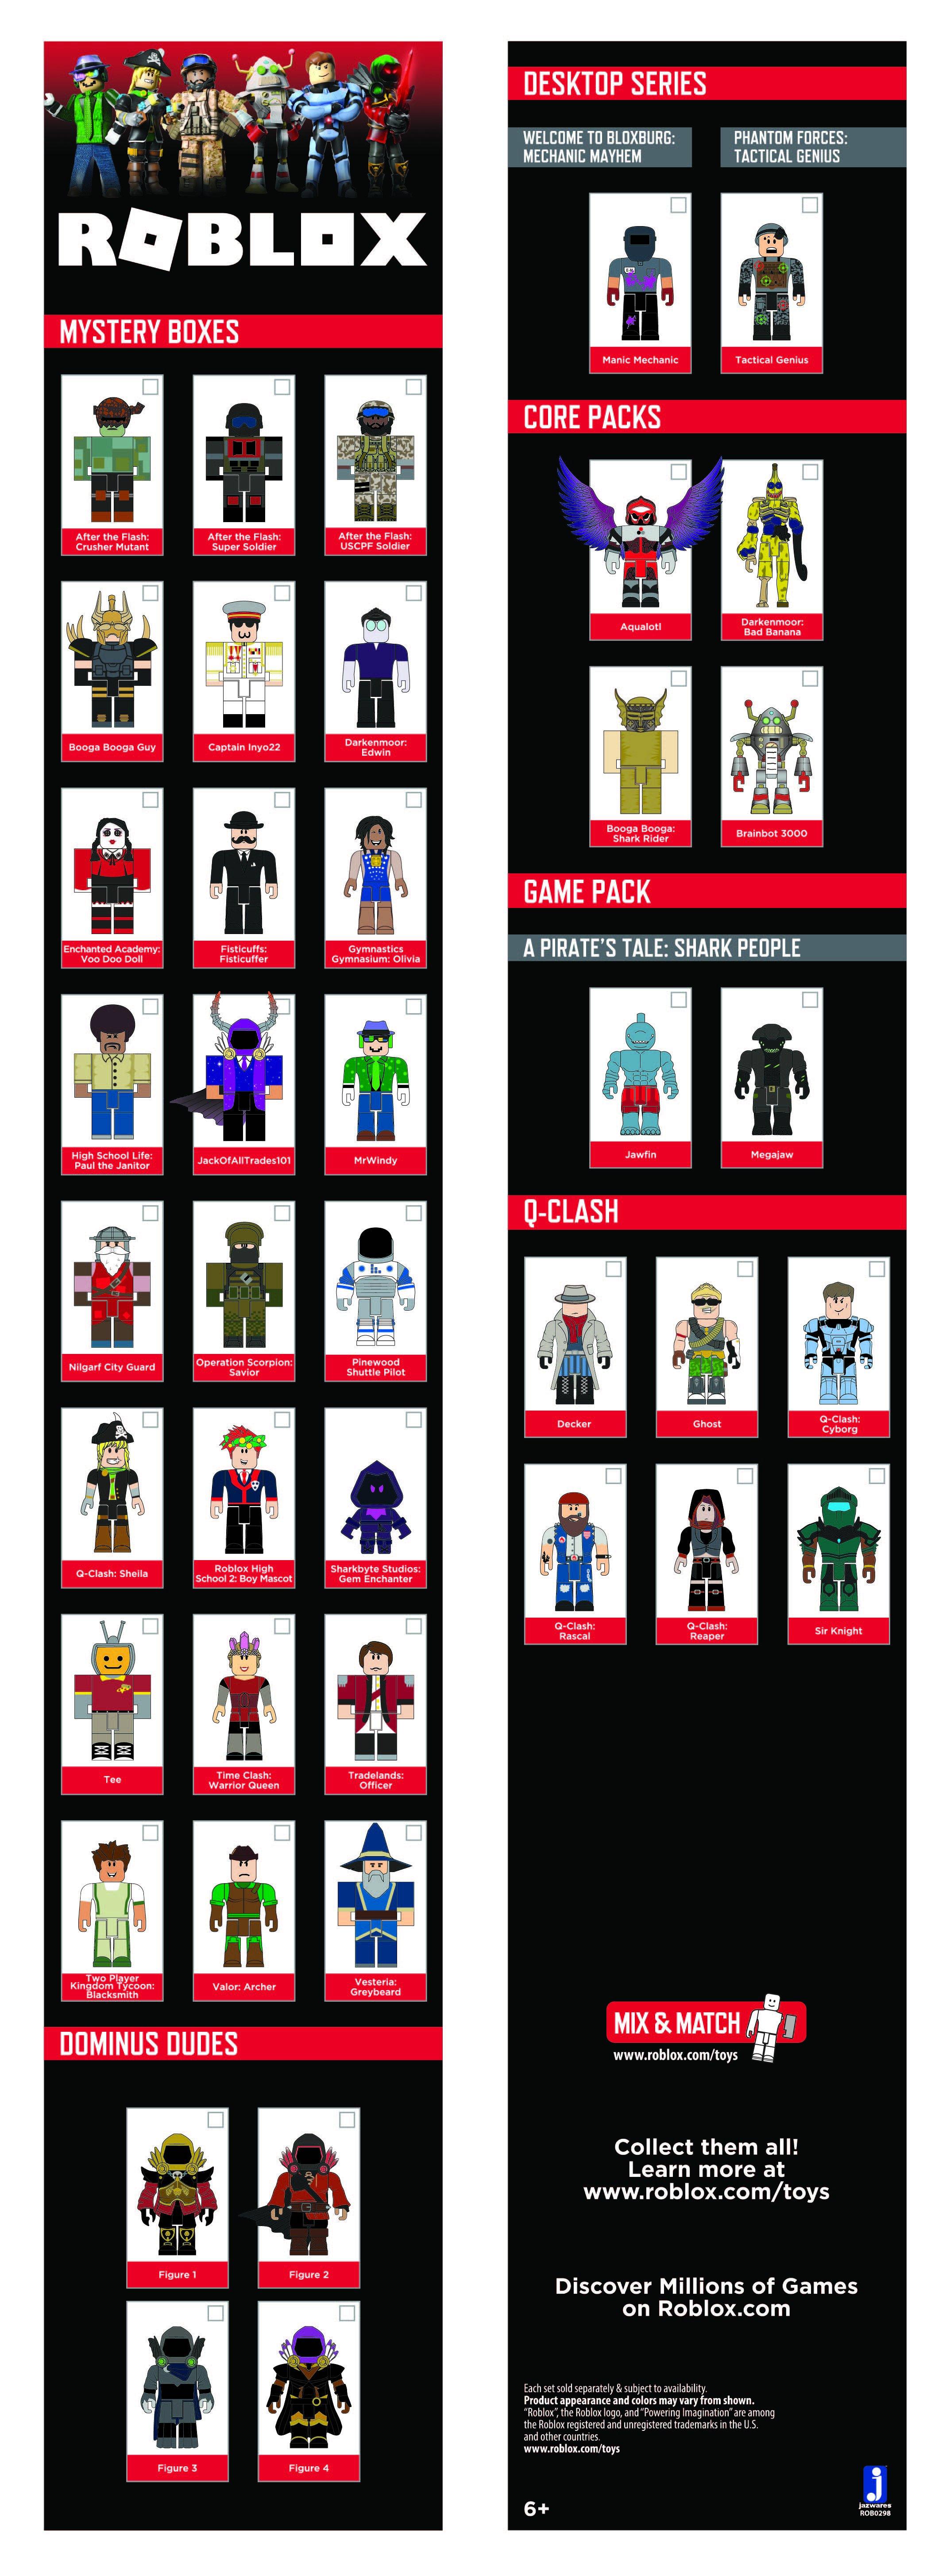 Roblox Action Collection Series 7 Mystery Figure Includes 1 Figure And Exclusive Virtual Item Gamestop - roblox mystery box series